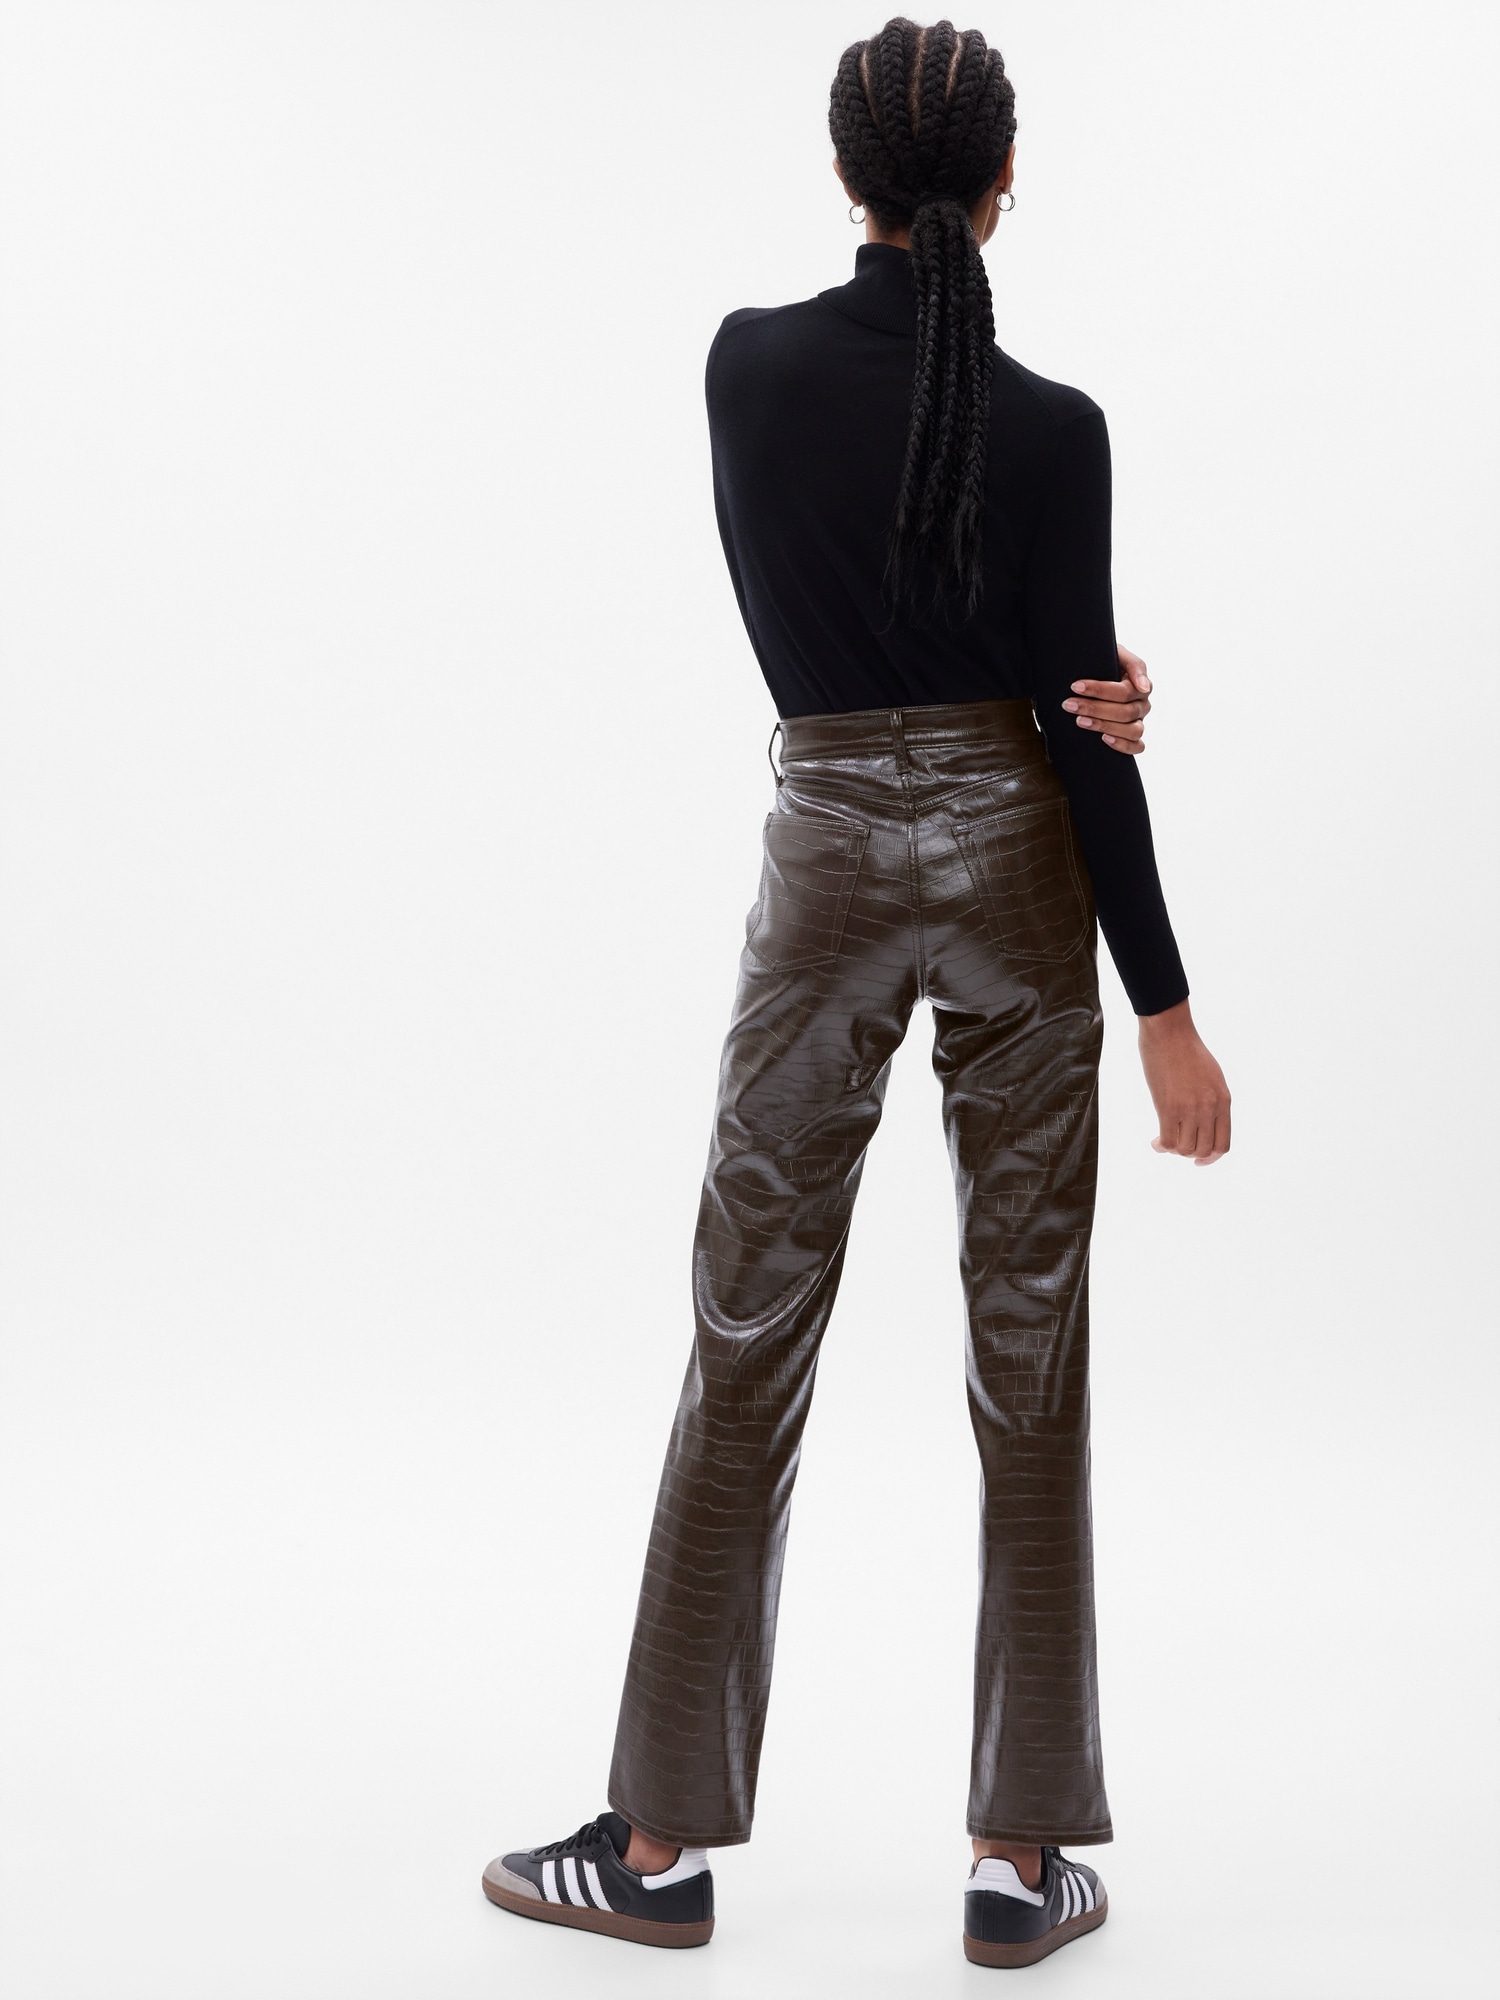 Dusty Rose Crop Top, Baggy Leather Pants. - The Hunter Collector